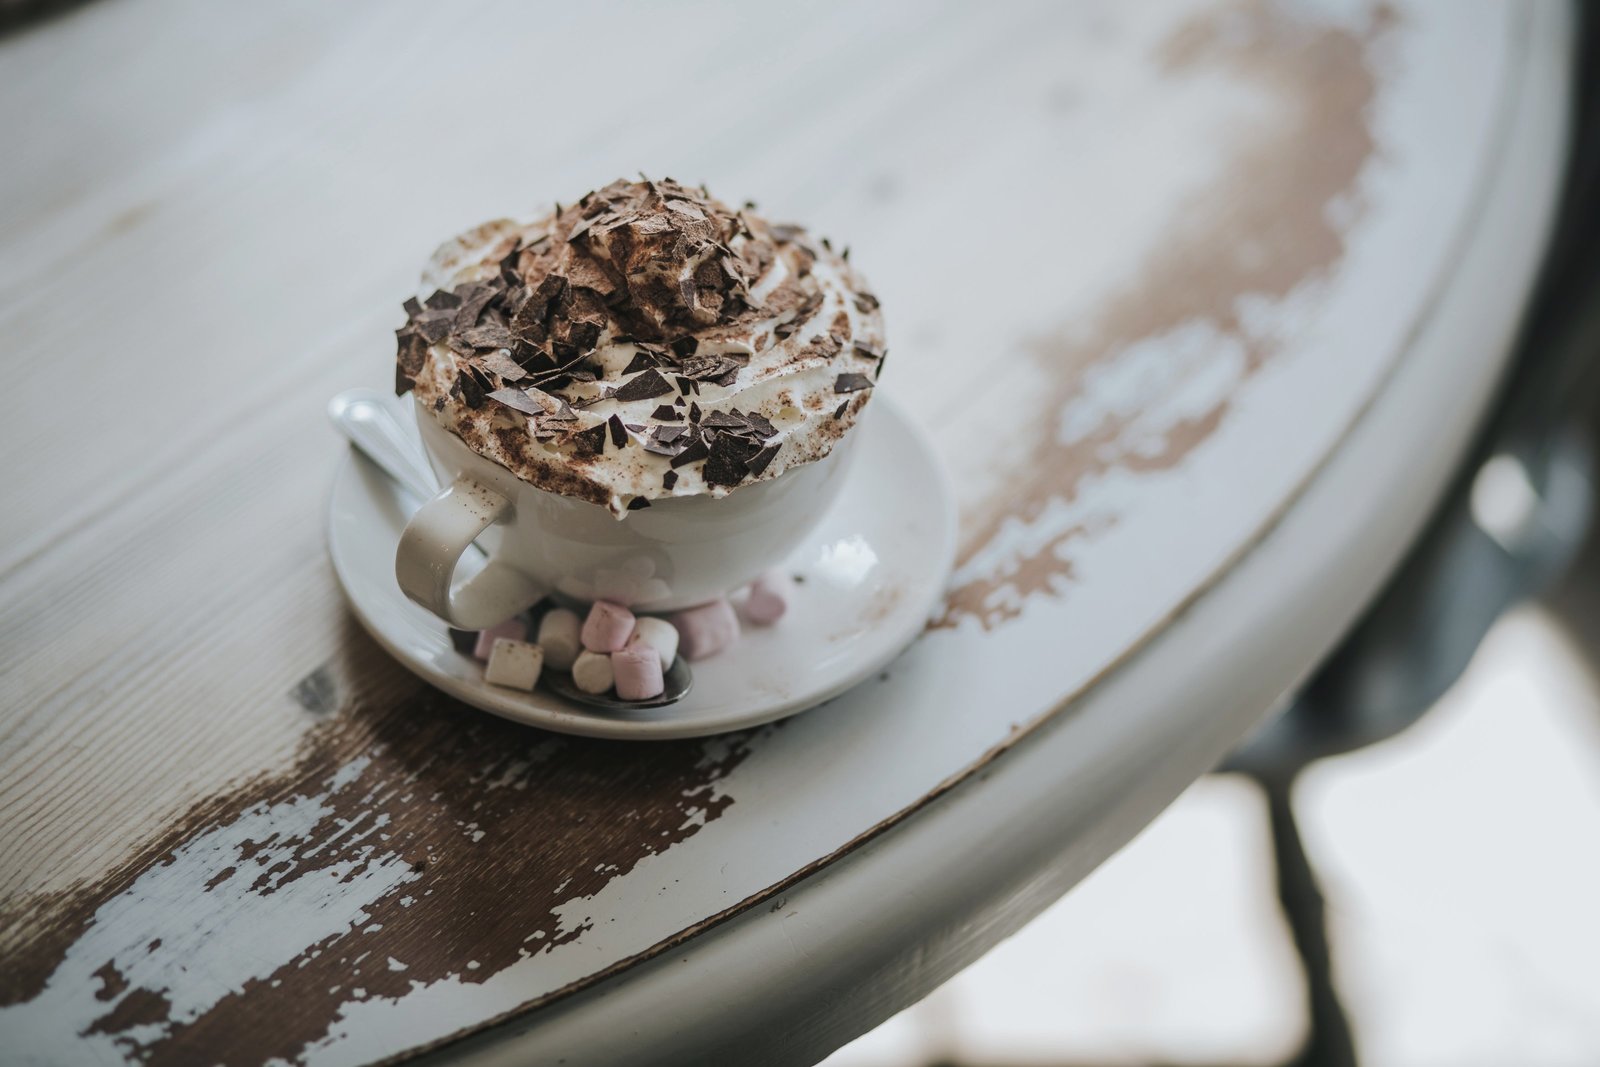 Hot Chocolate with cream and marshmallows available at Baldry's Tearoom in Grasmere Village, The Lake District